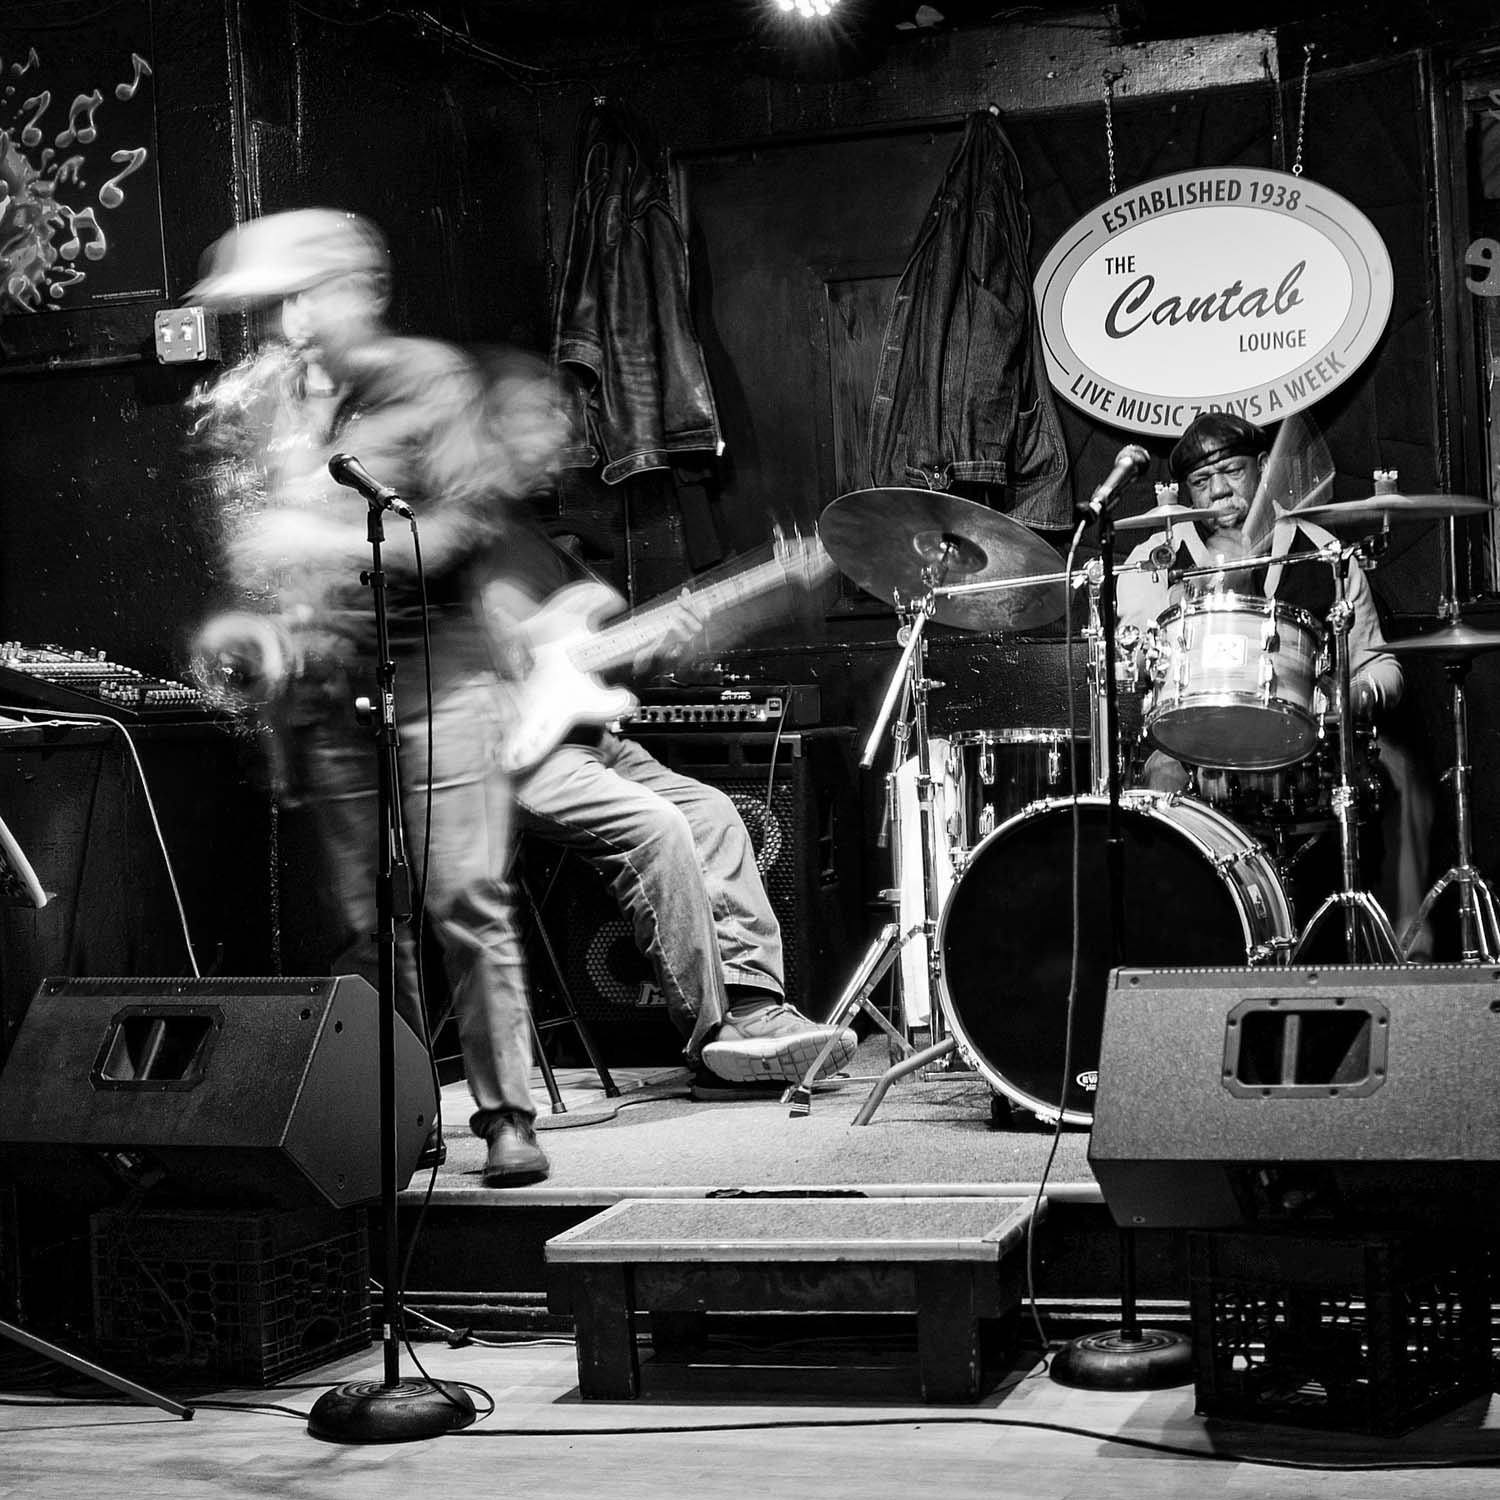 Black and white photo of a band performing at the cantab lounge. The photo was taken in such a way that the band members are seen in motion. A drummer, lead singer and bass player sitting in the back are seen performing.